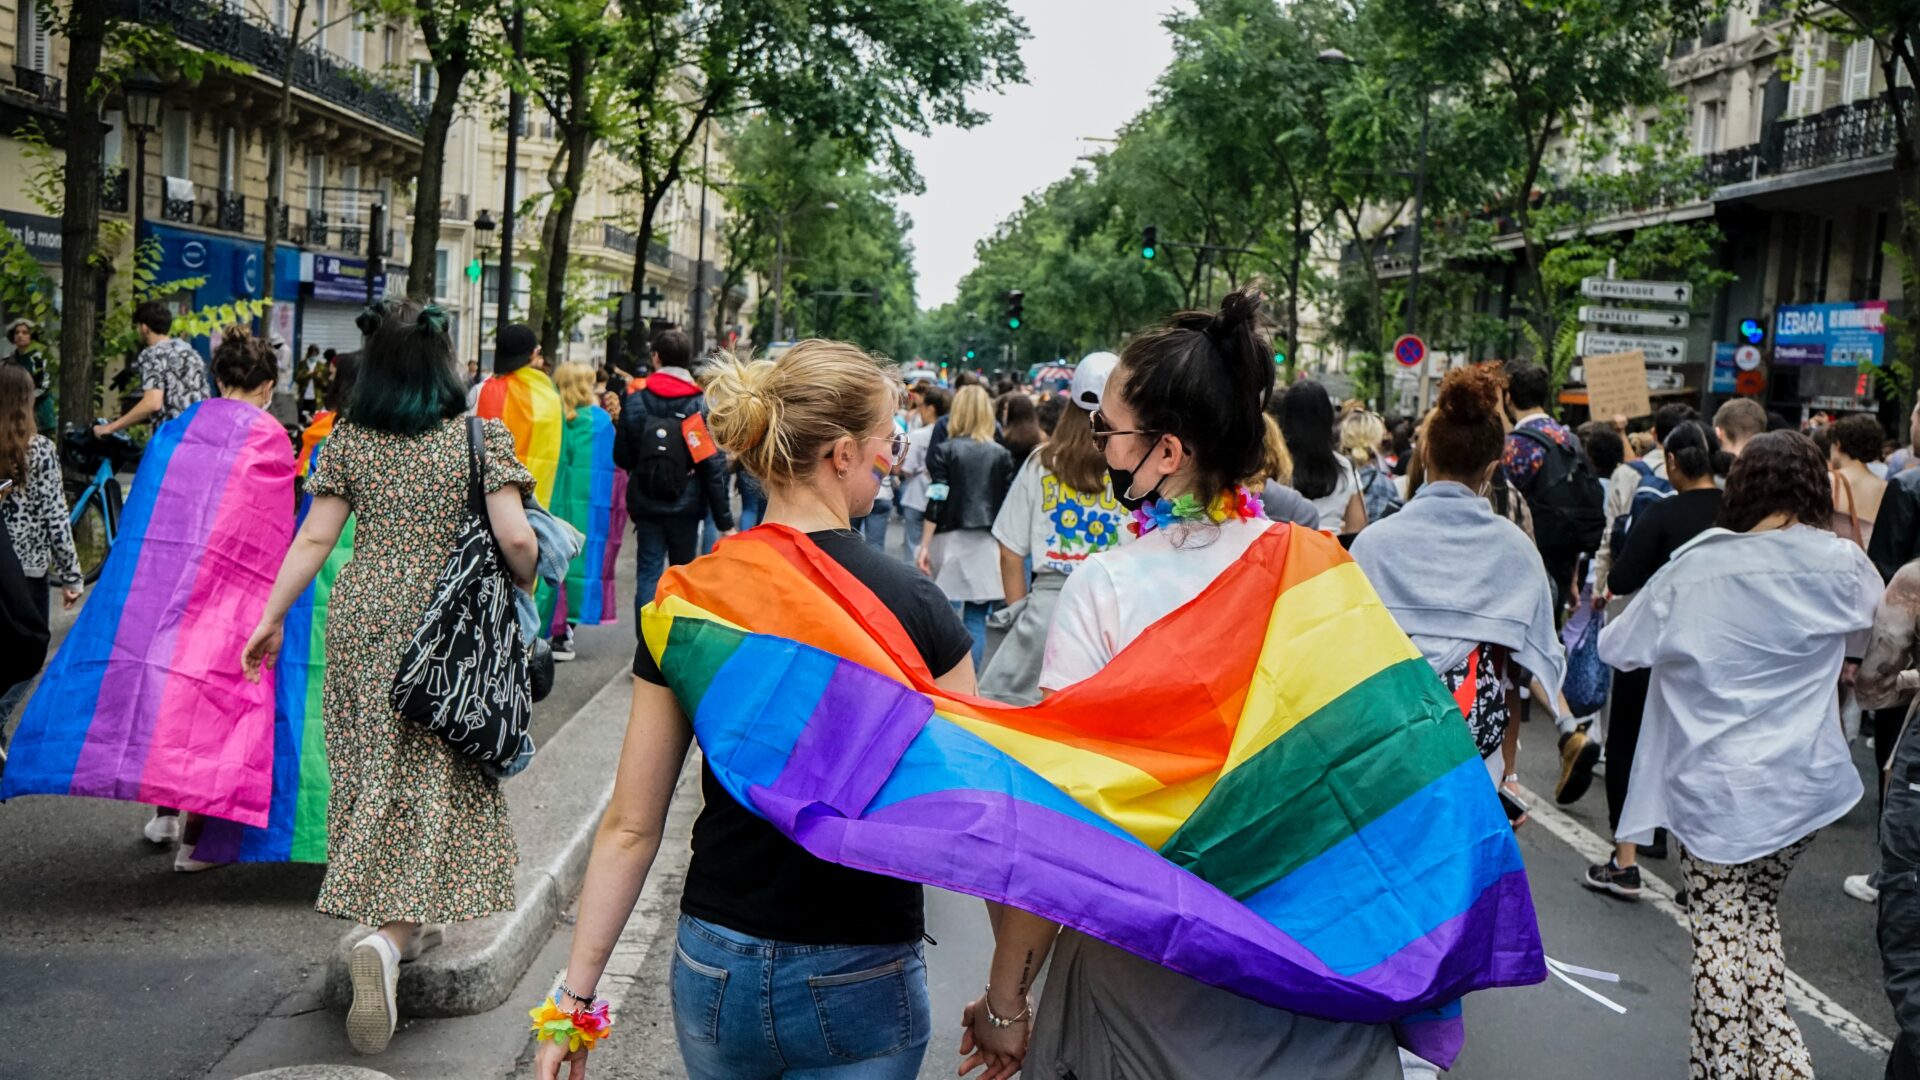 Two people at pride with a flag.